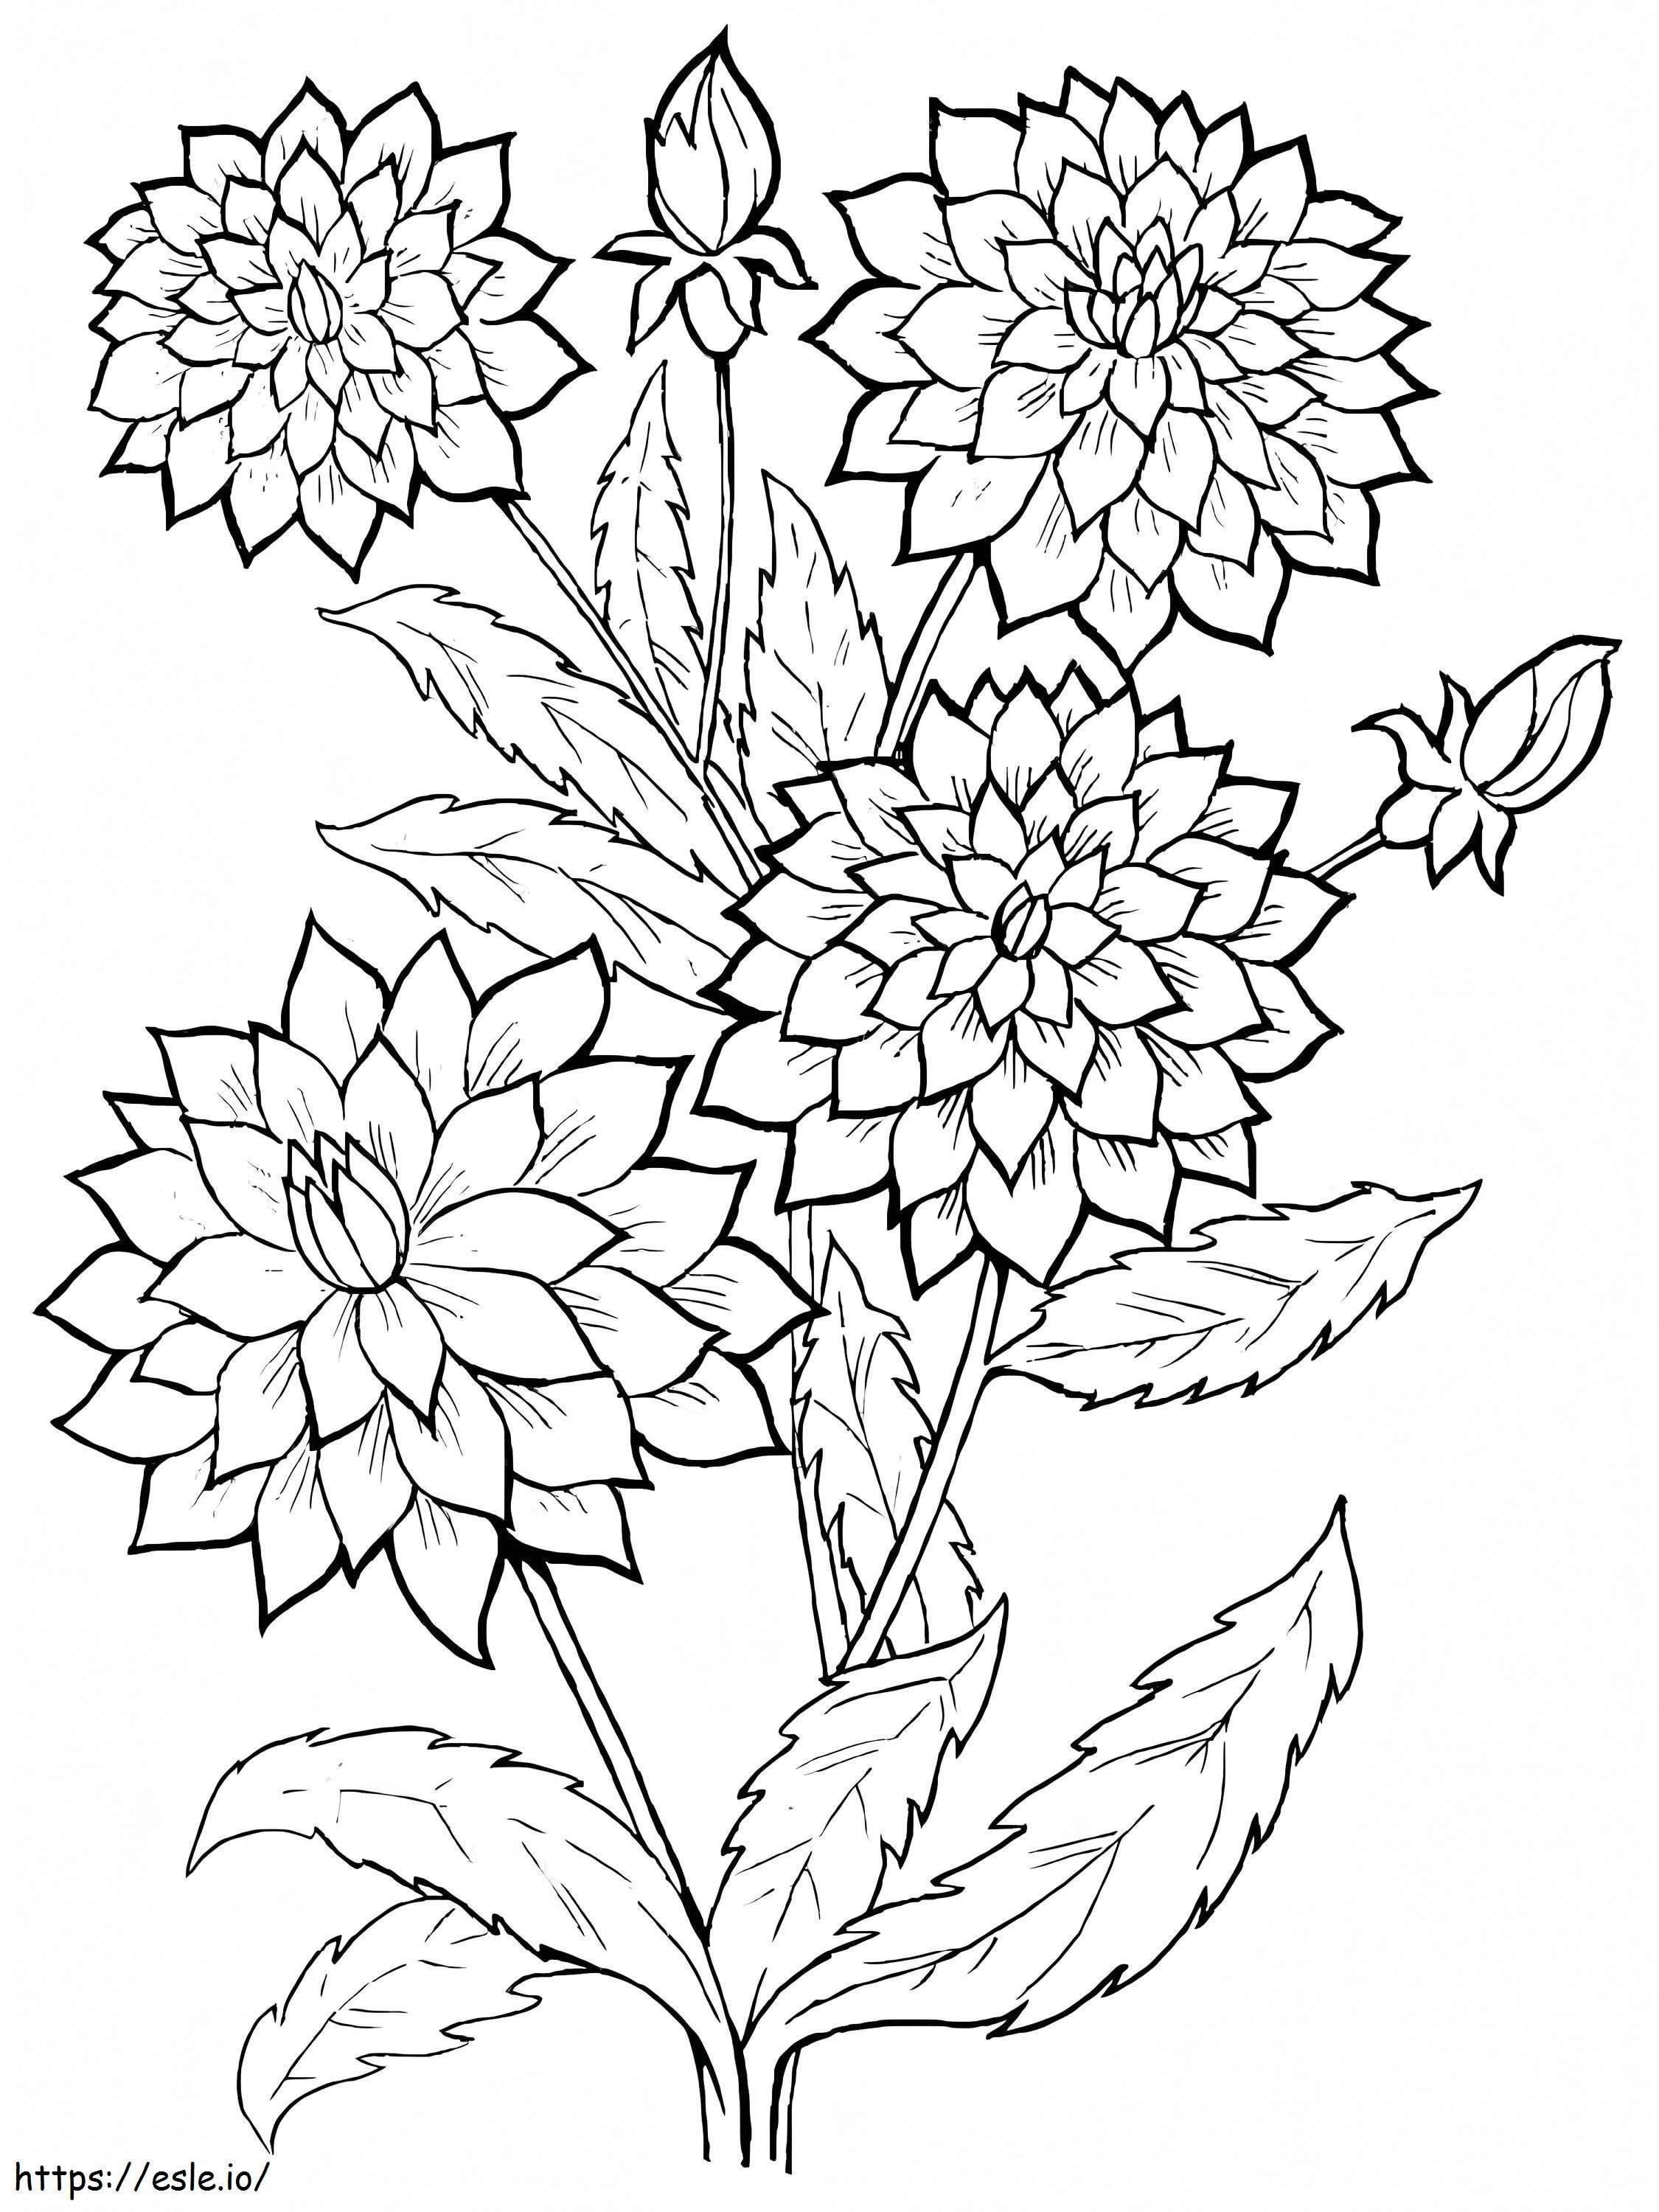 Beautiful Dahlia Flowers coloring page